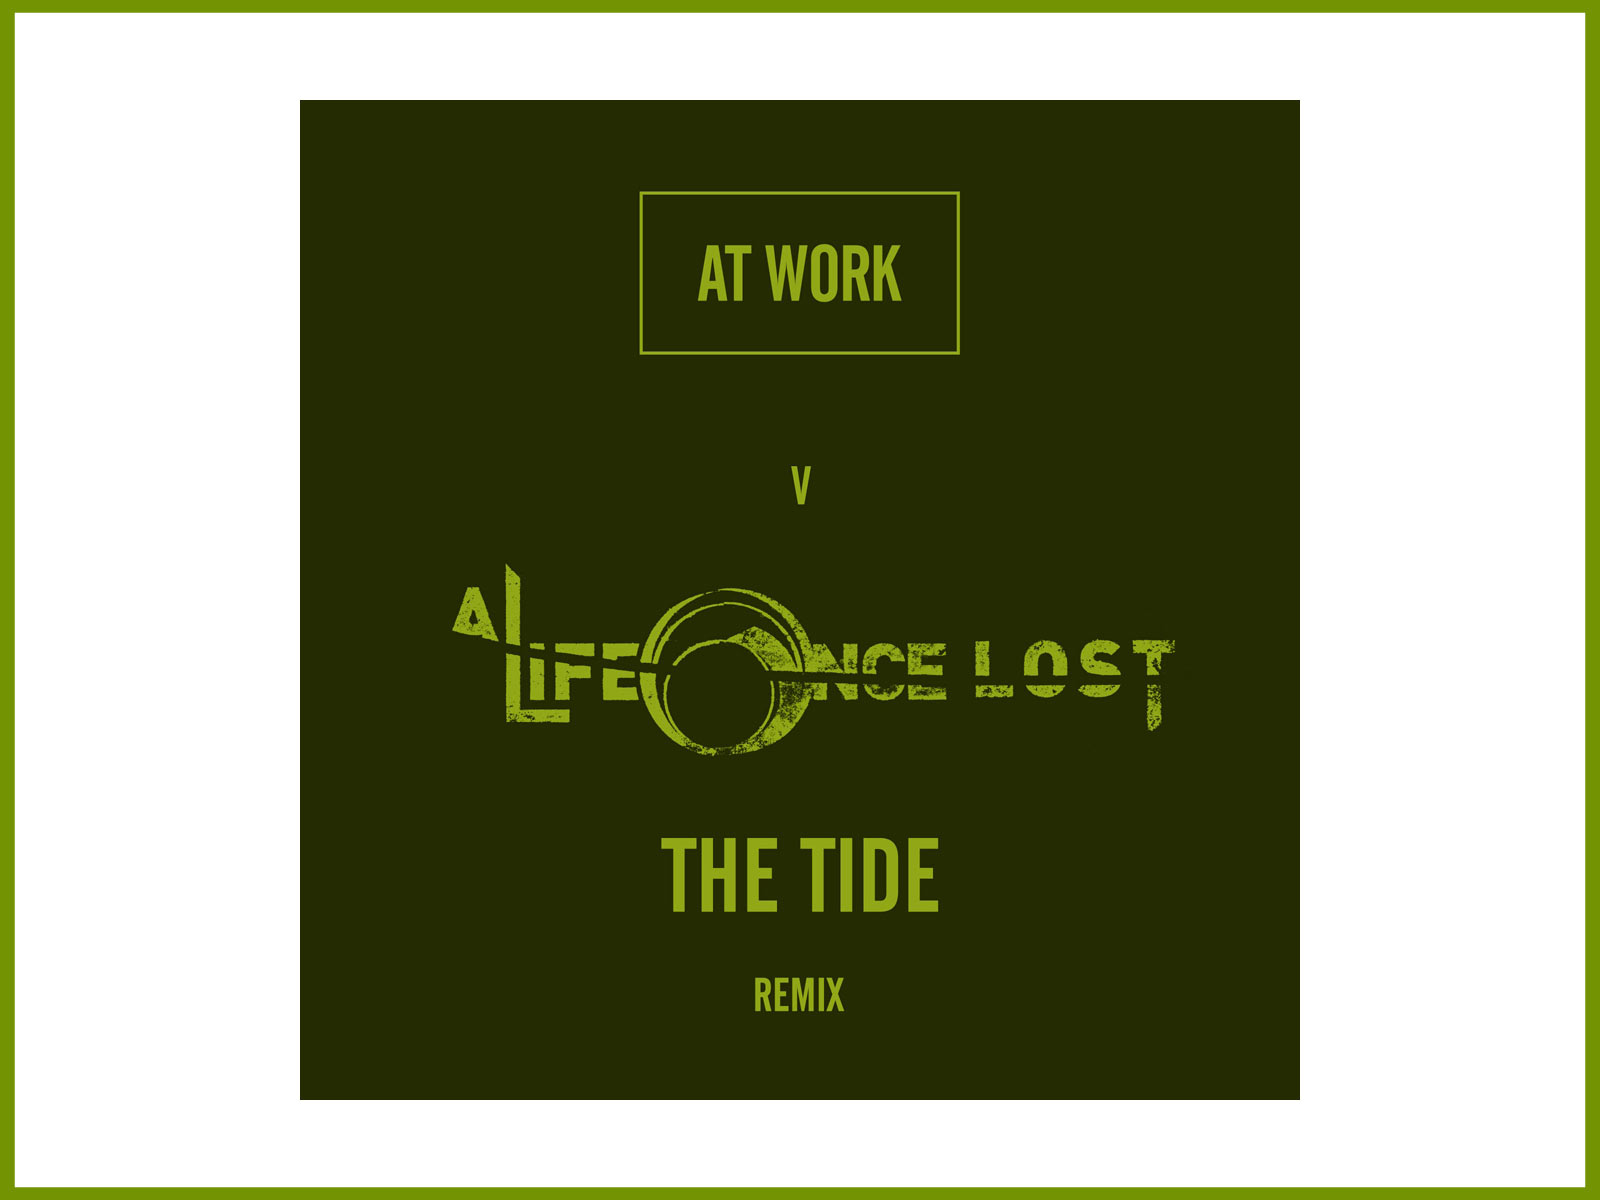 Available (no more) At Work remixes A Life Once Lost “The Tide”